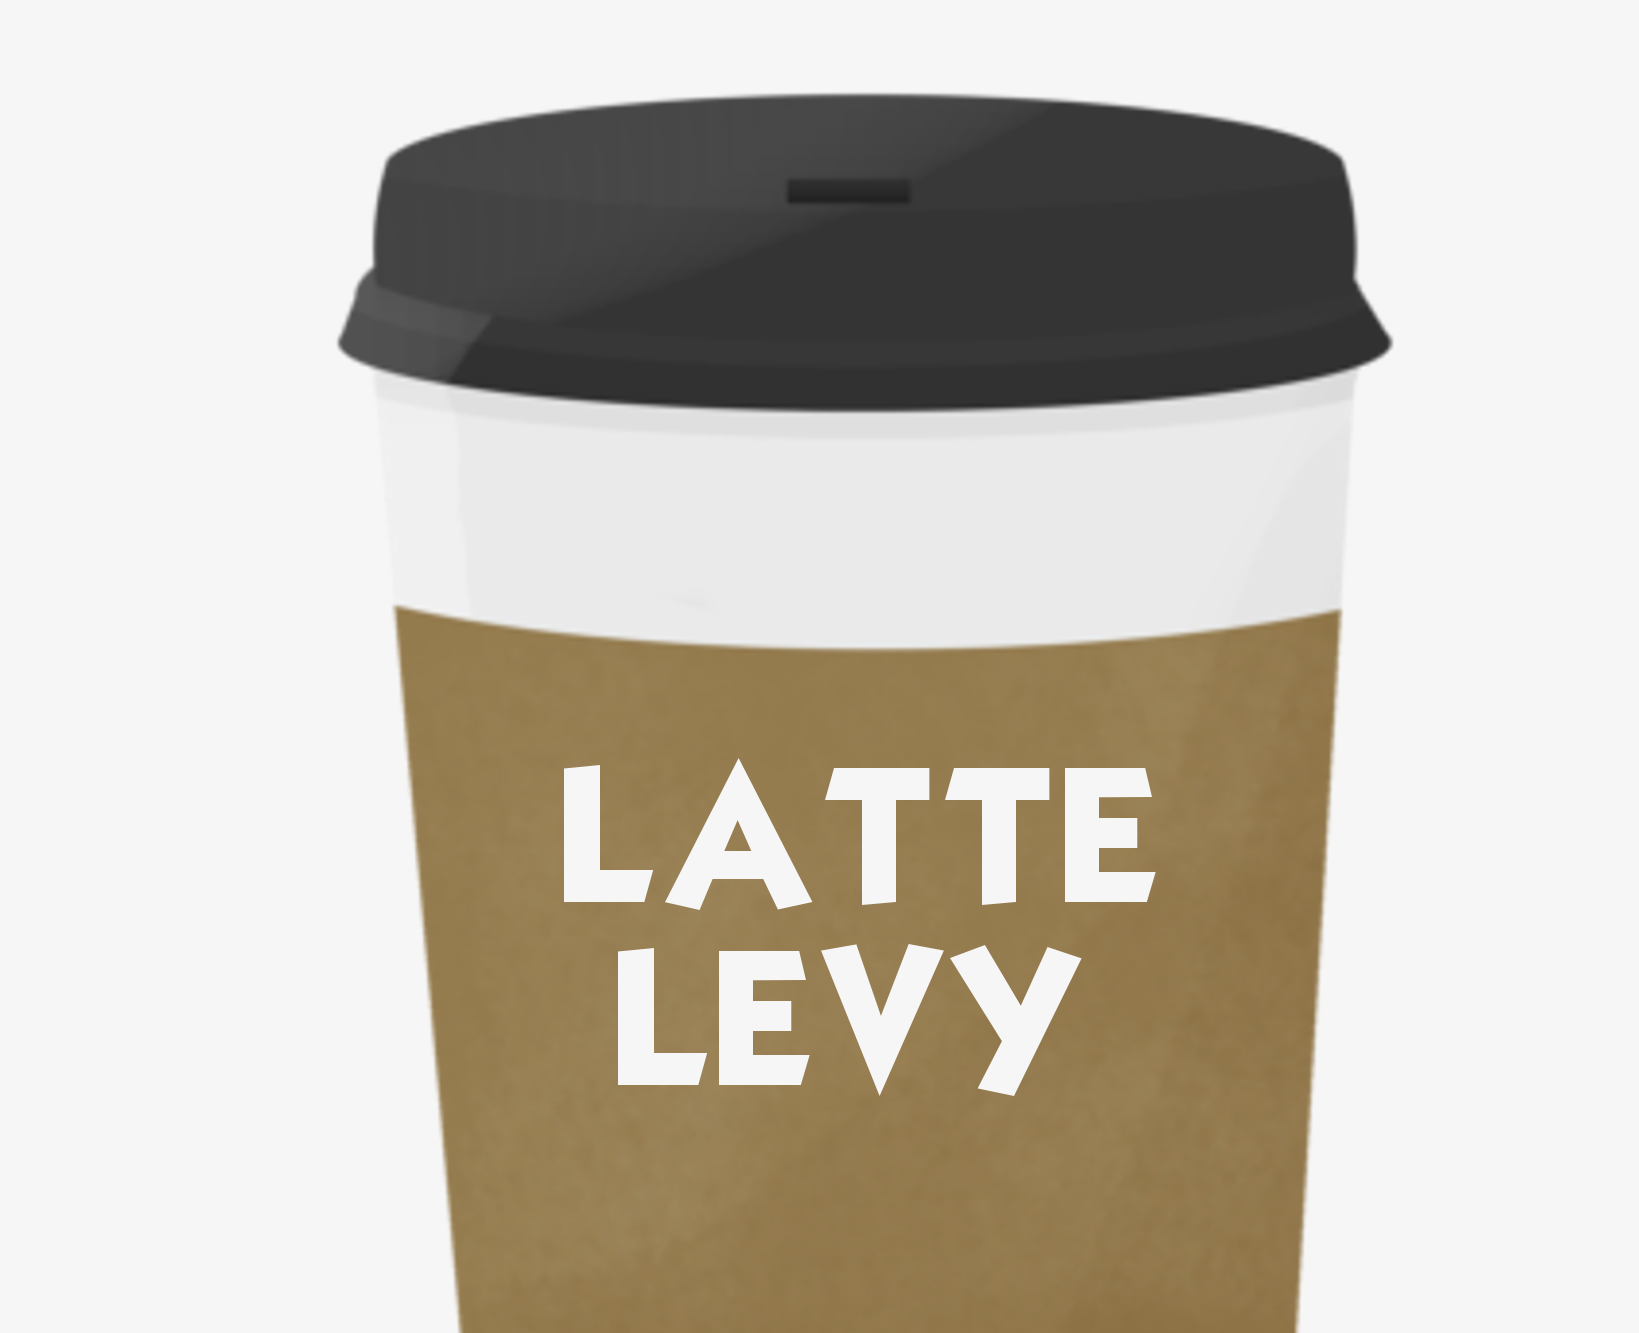 Ireland Govt Reveals When It Plans To Impose 'Latte Levy' On Coffee Cups